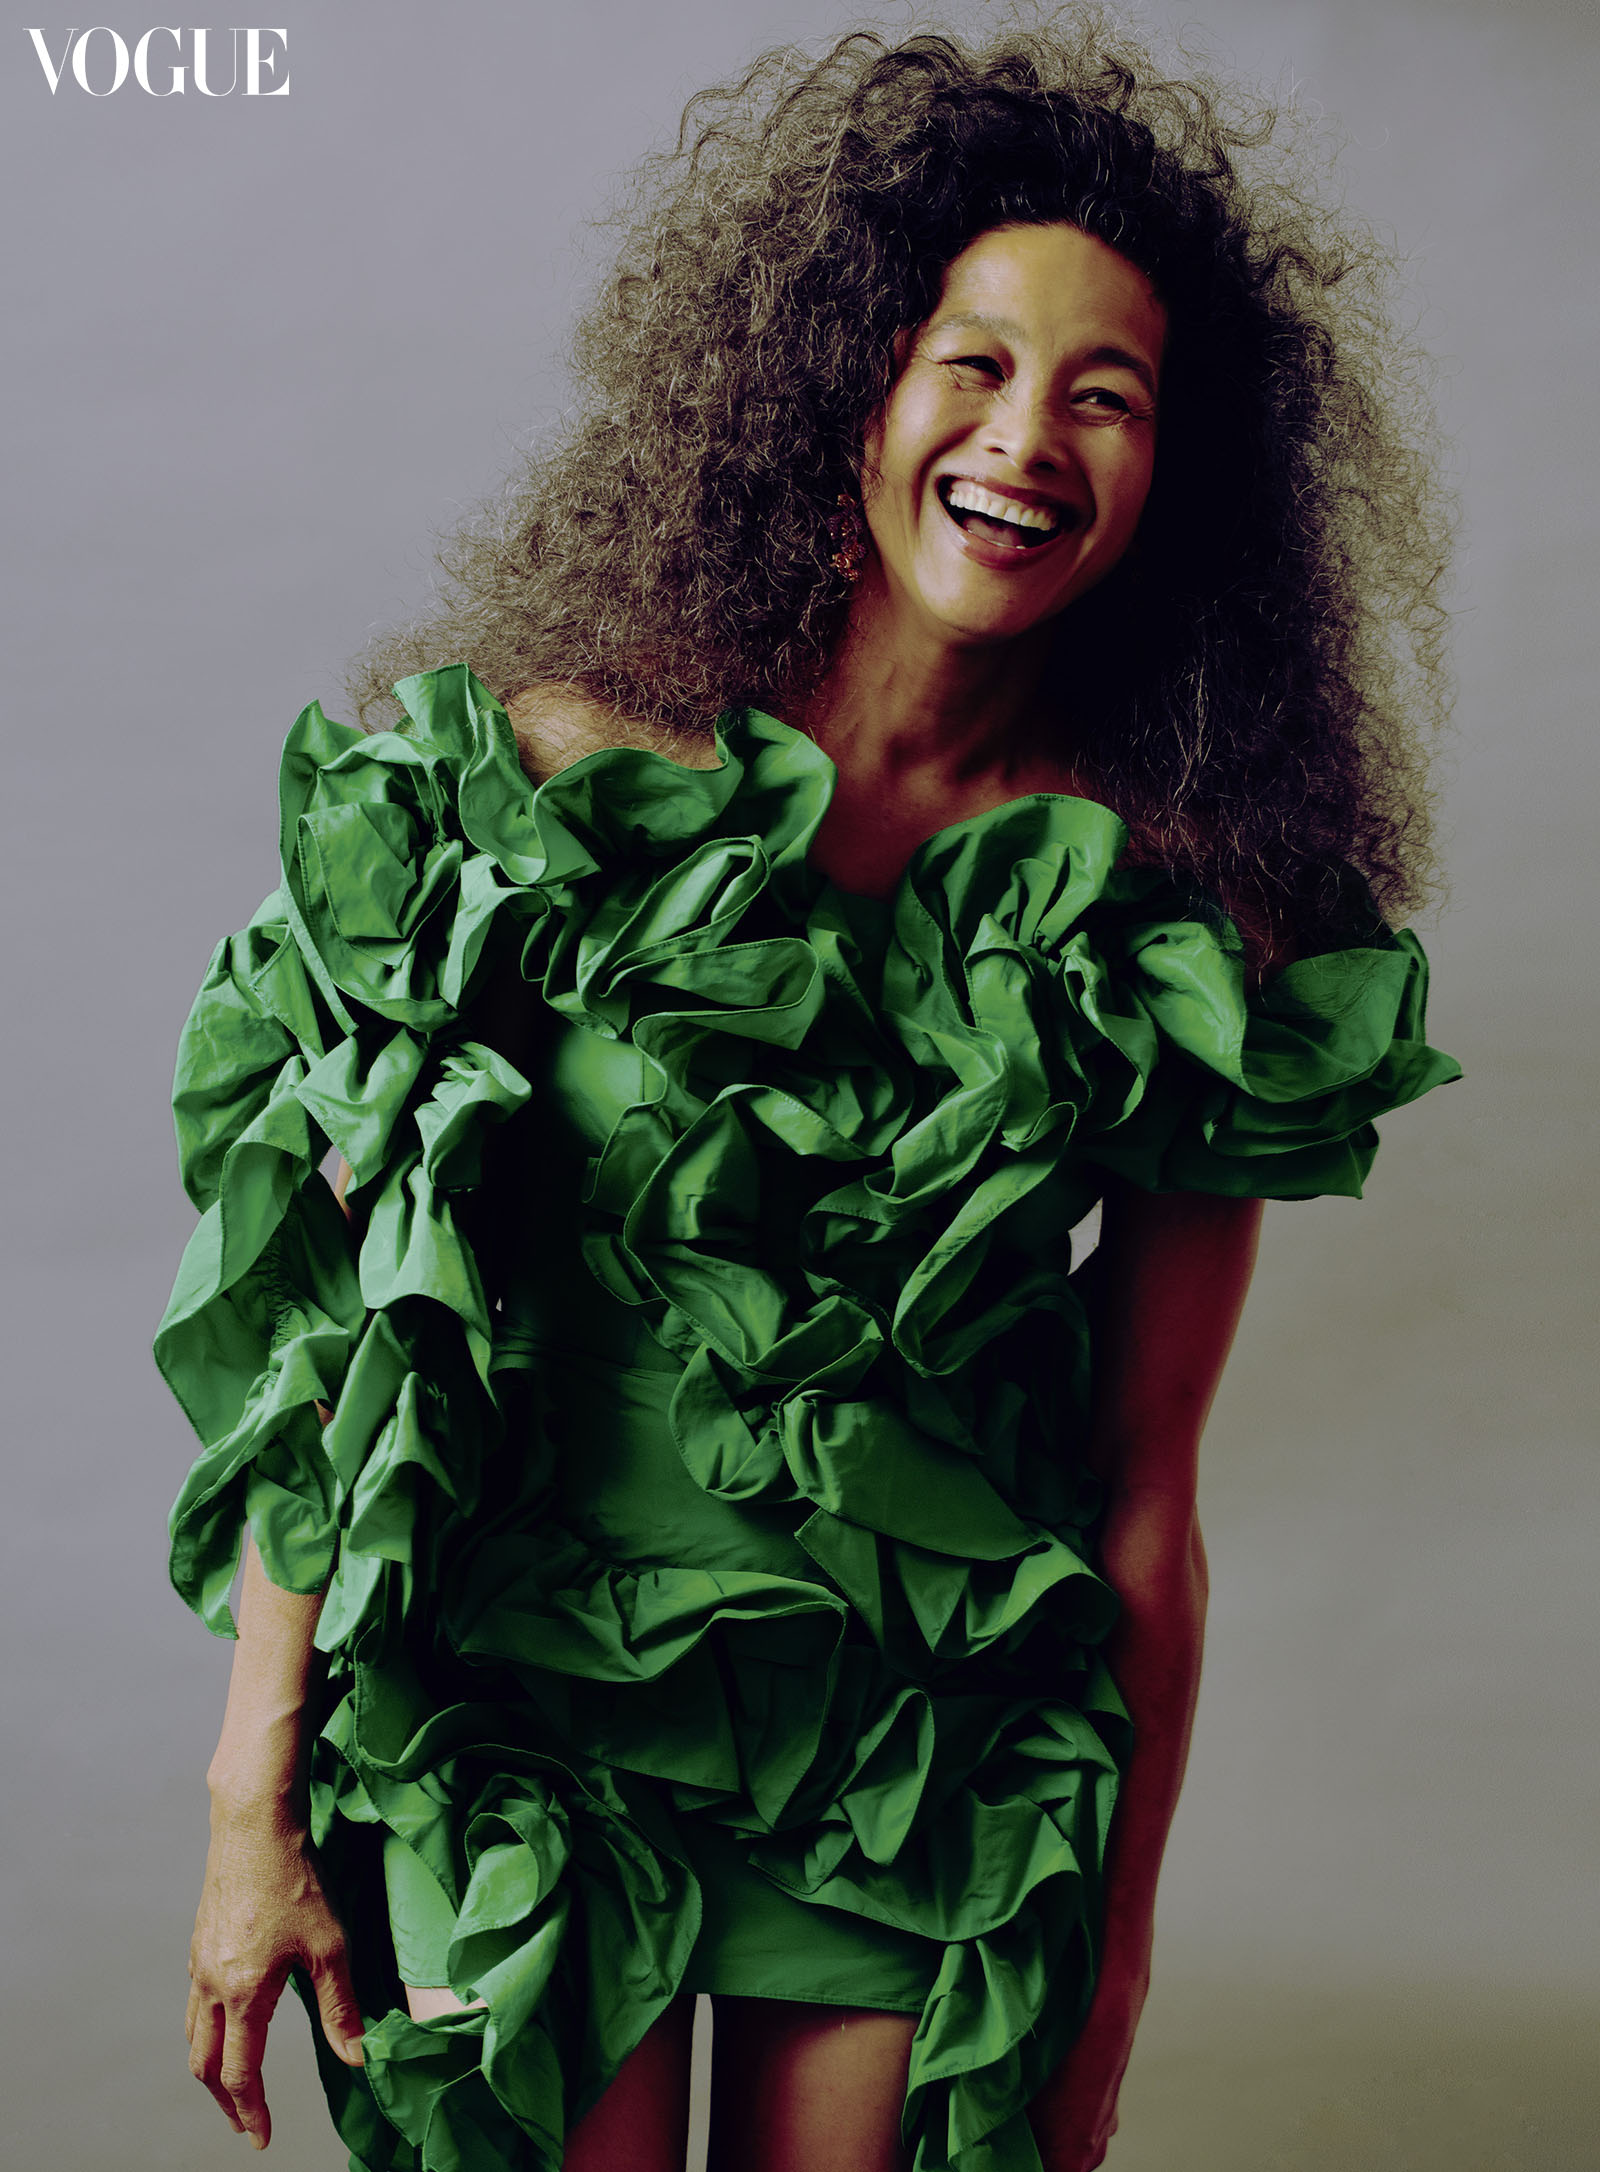 Ankvas green ruffle dress and Levian orchid earrings photographed by Harold Julian.